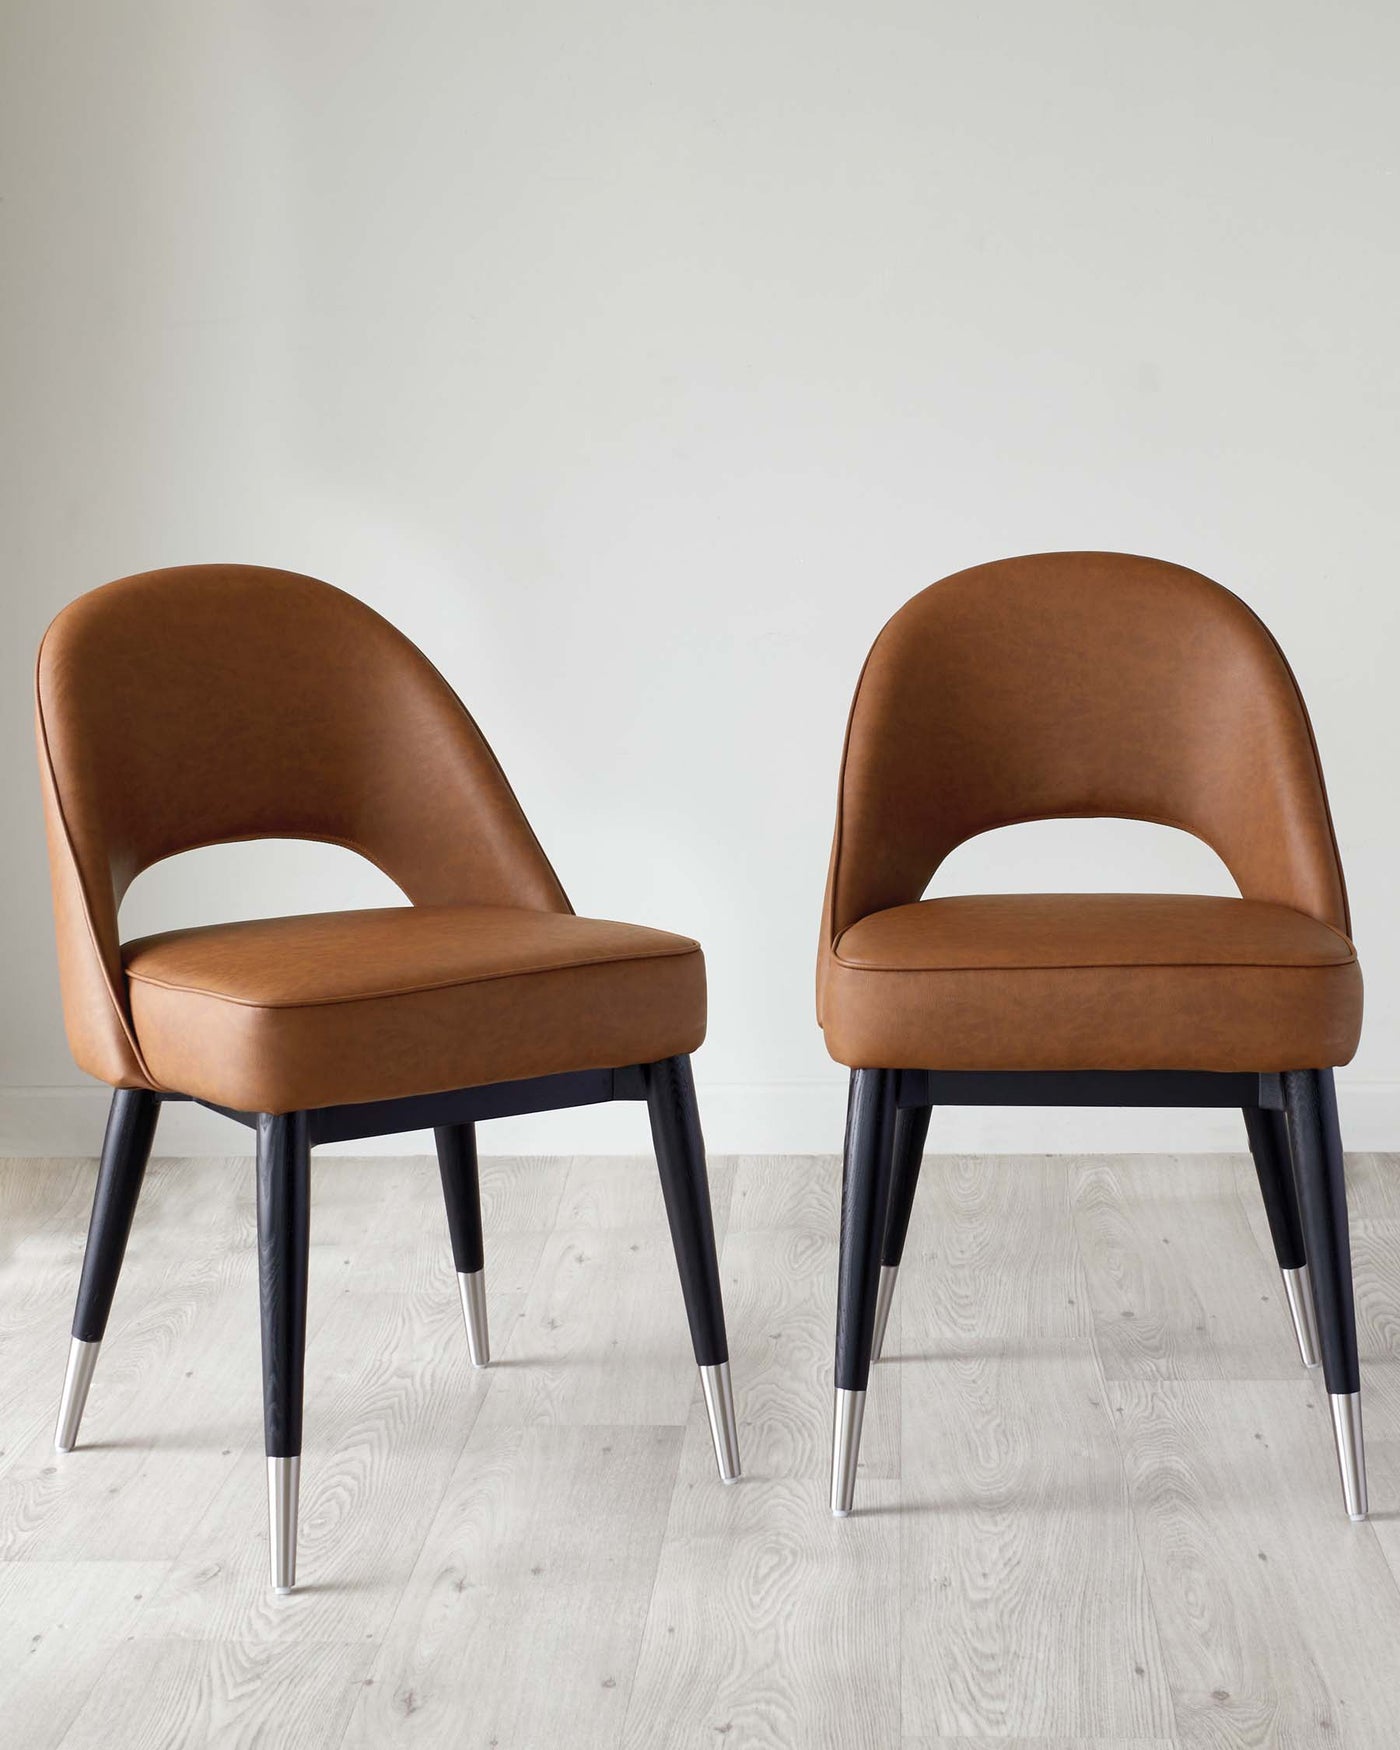 Two modern dining chairs with brown leather upholstery and contrasting dark wooden legs with metallic silver tips.